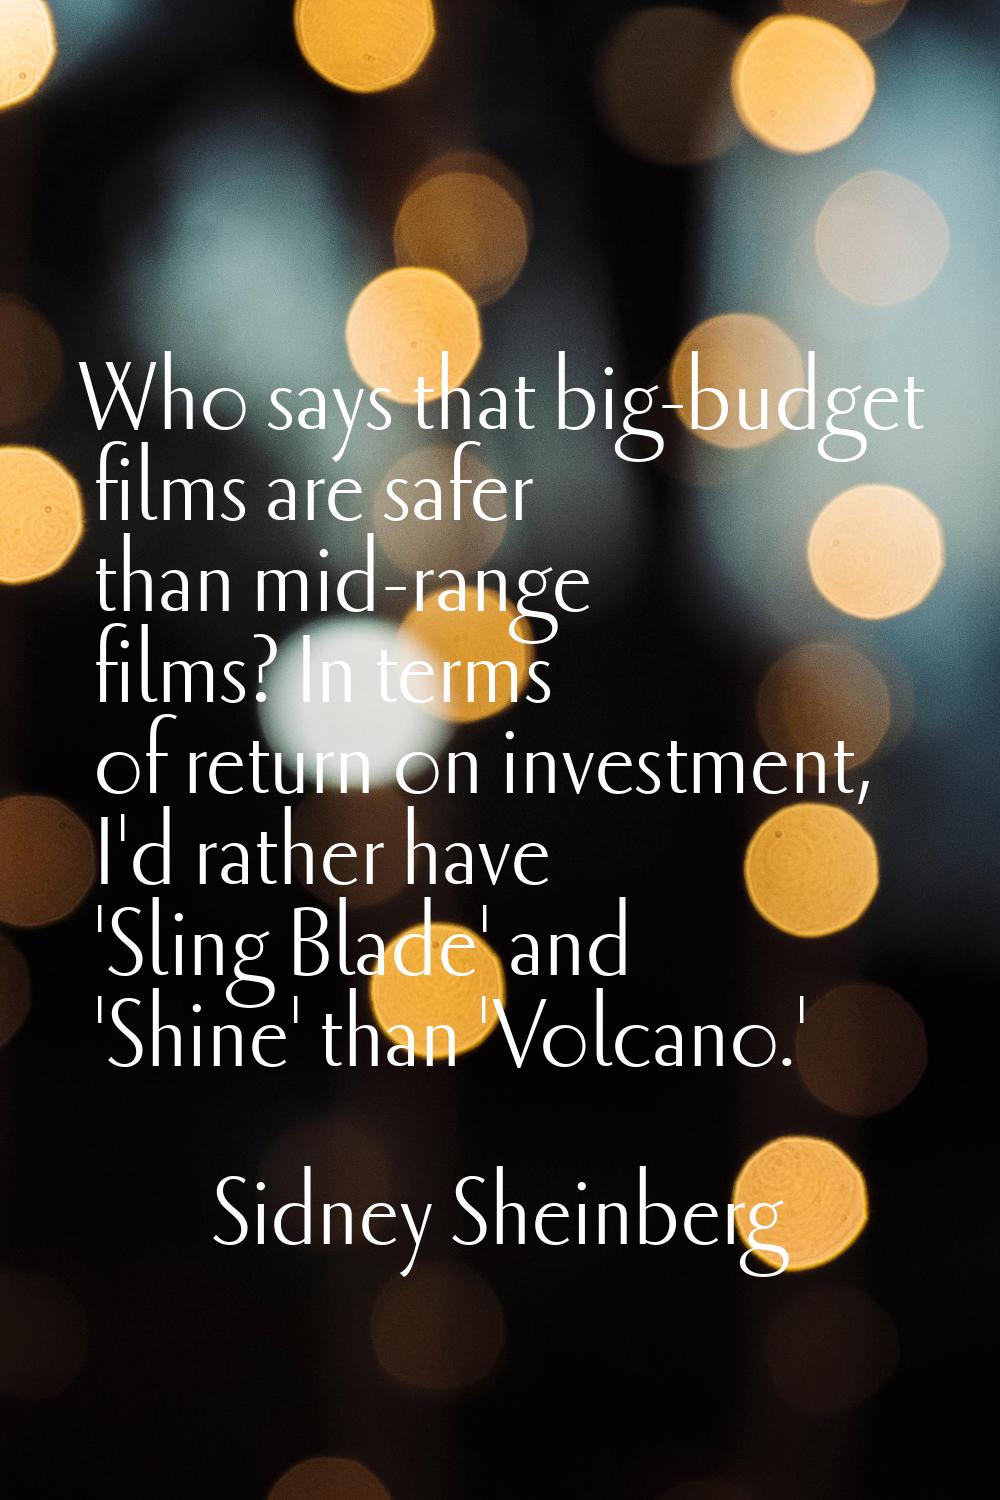 Who says that big-budget films are safer than mid-range films? In terms of return on investment, I'